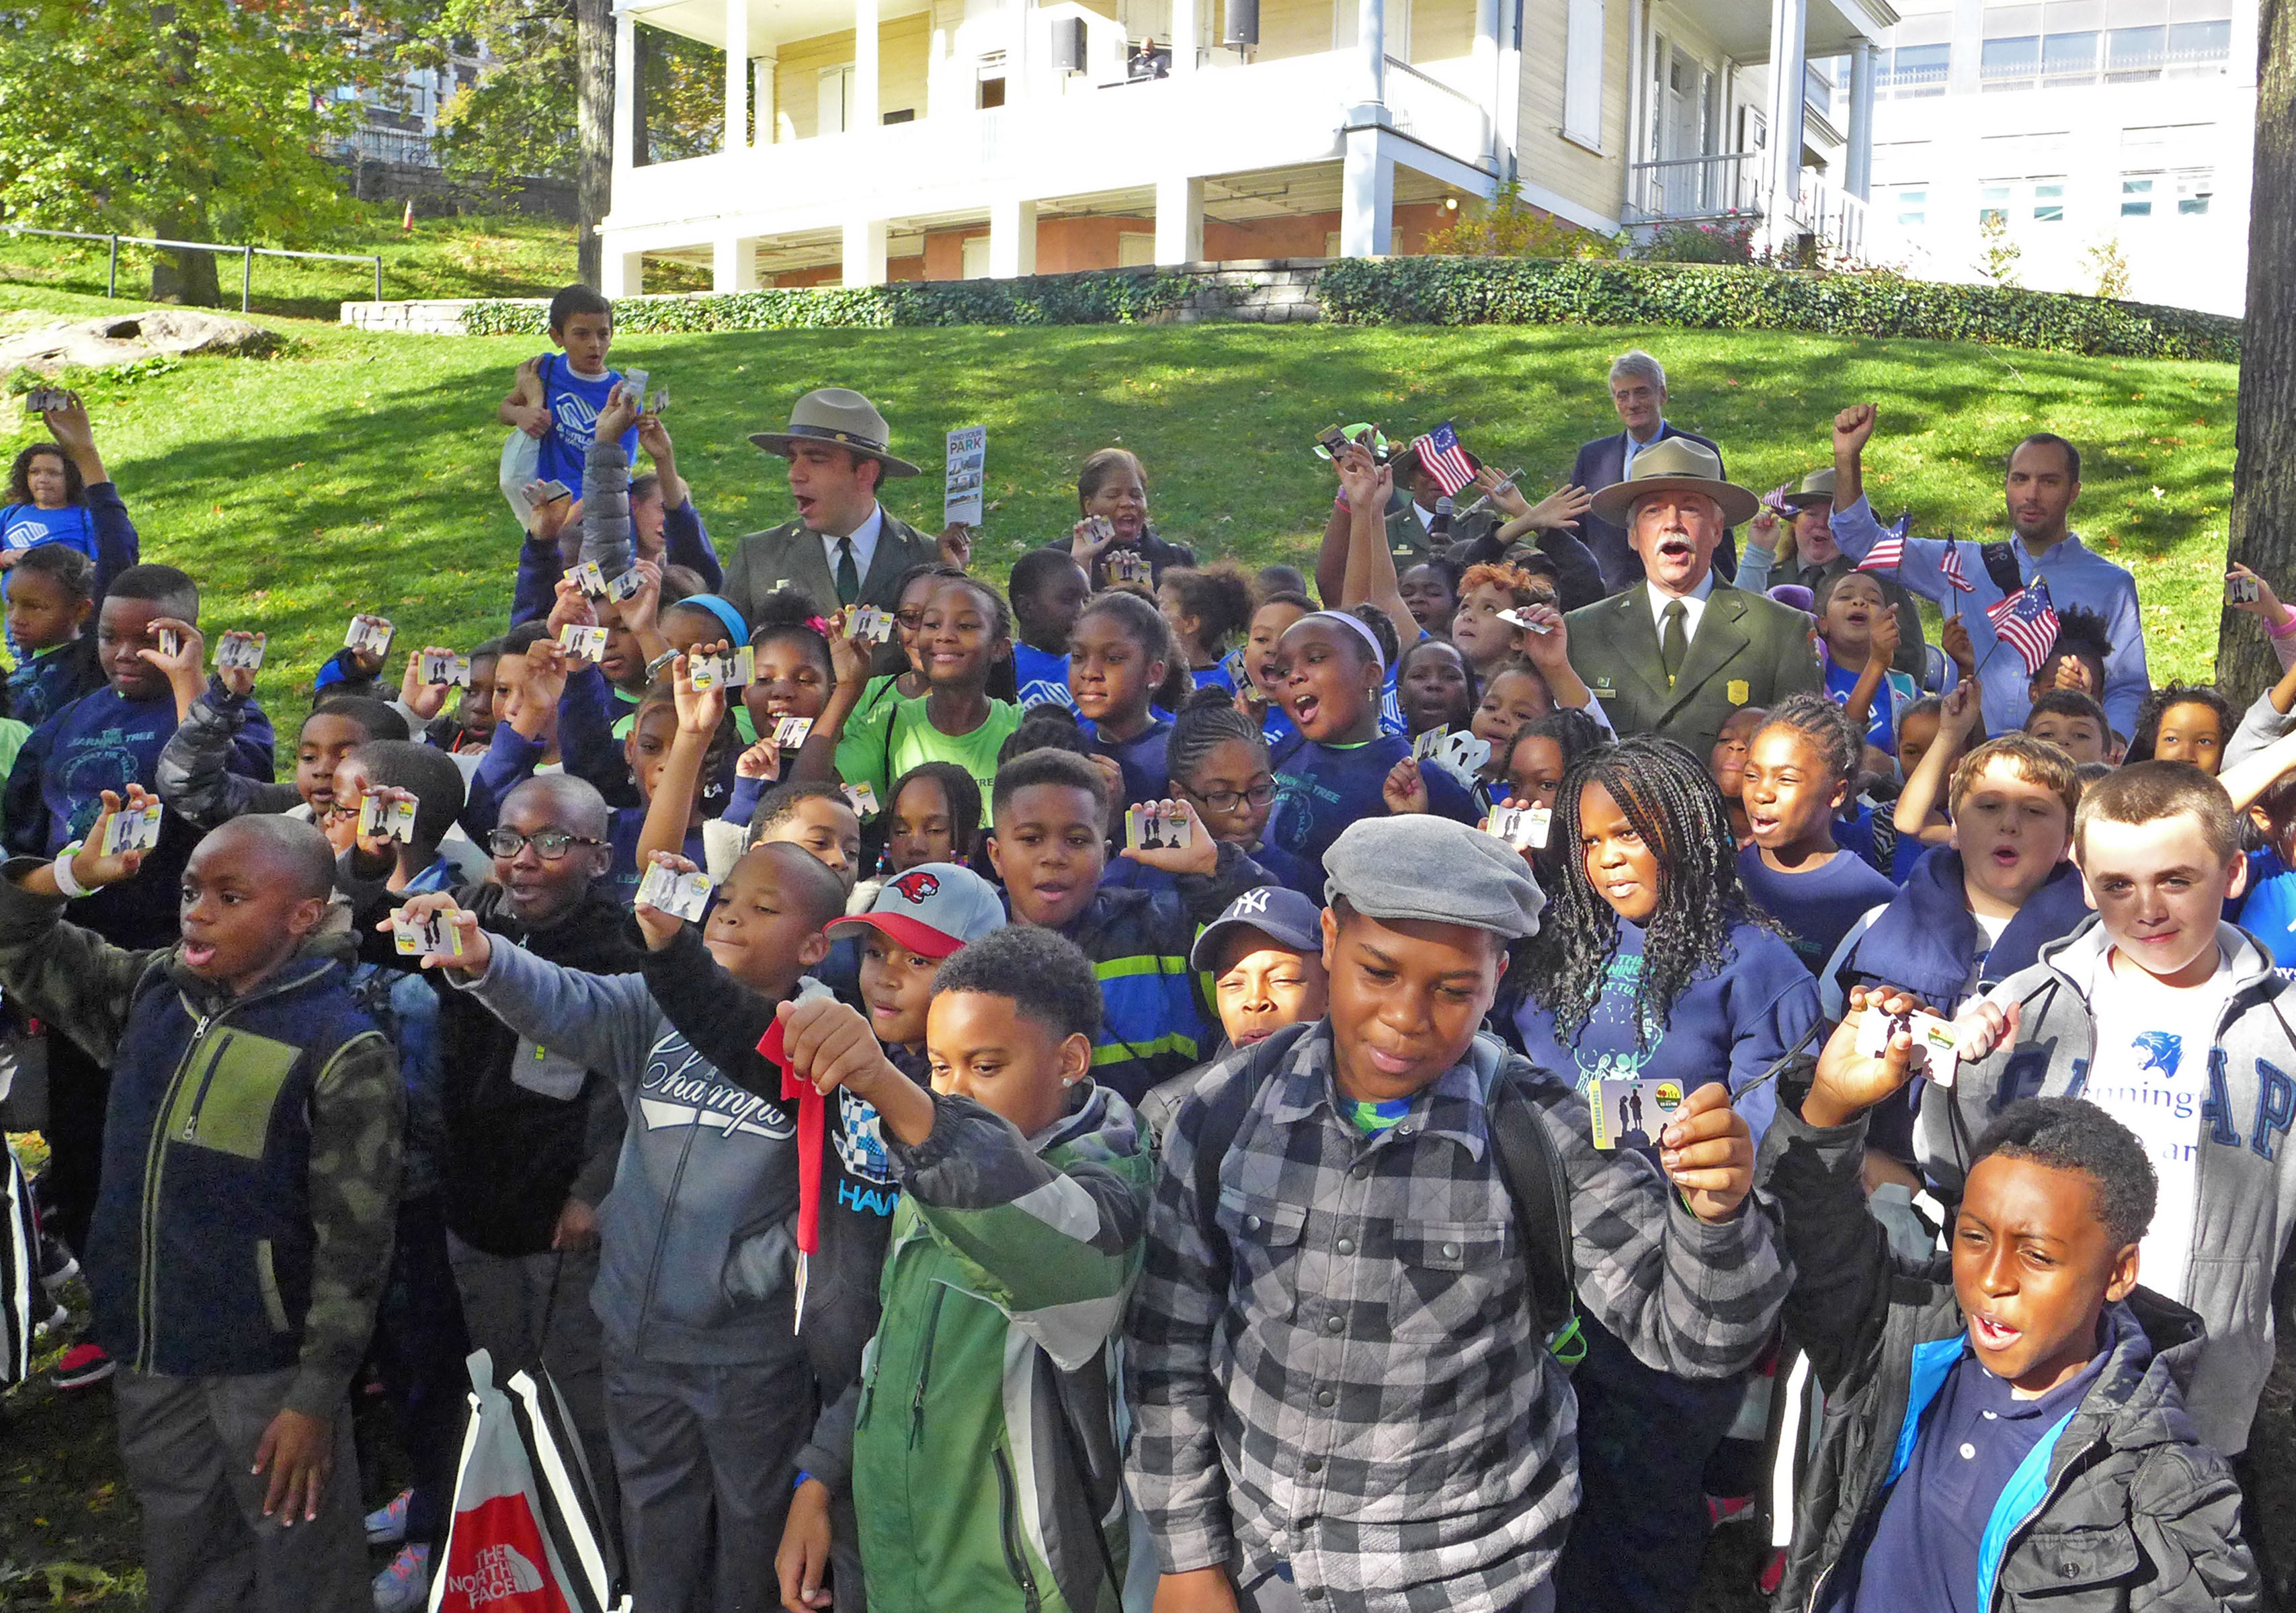 Fourth graders at an event in Hamilton Grange National Memorial hold up their Every Kid in a Park passes.